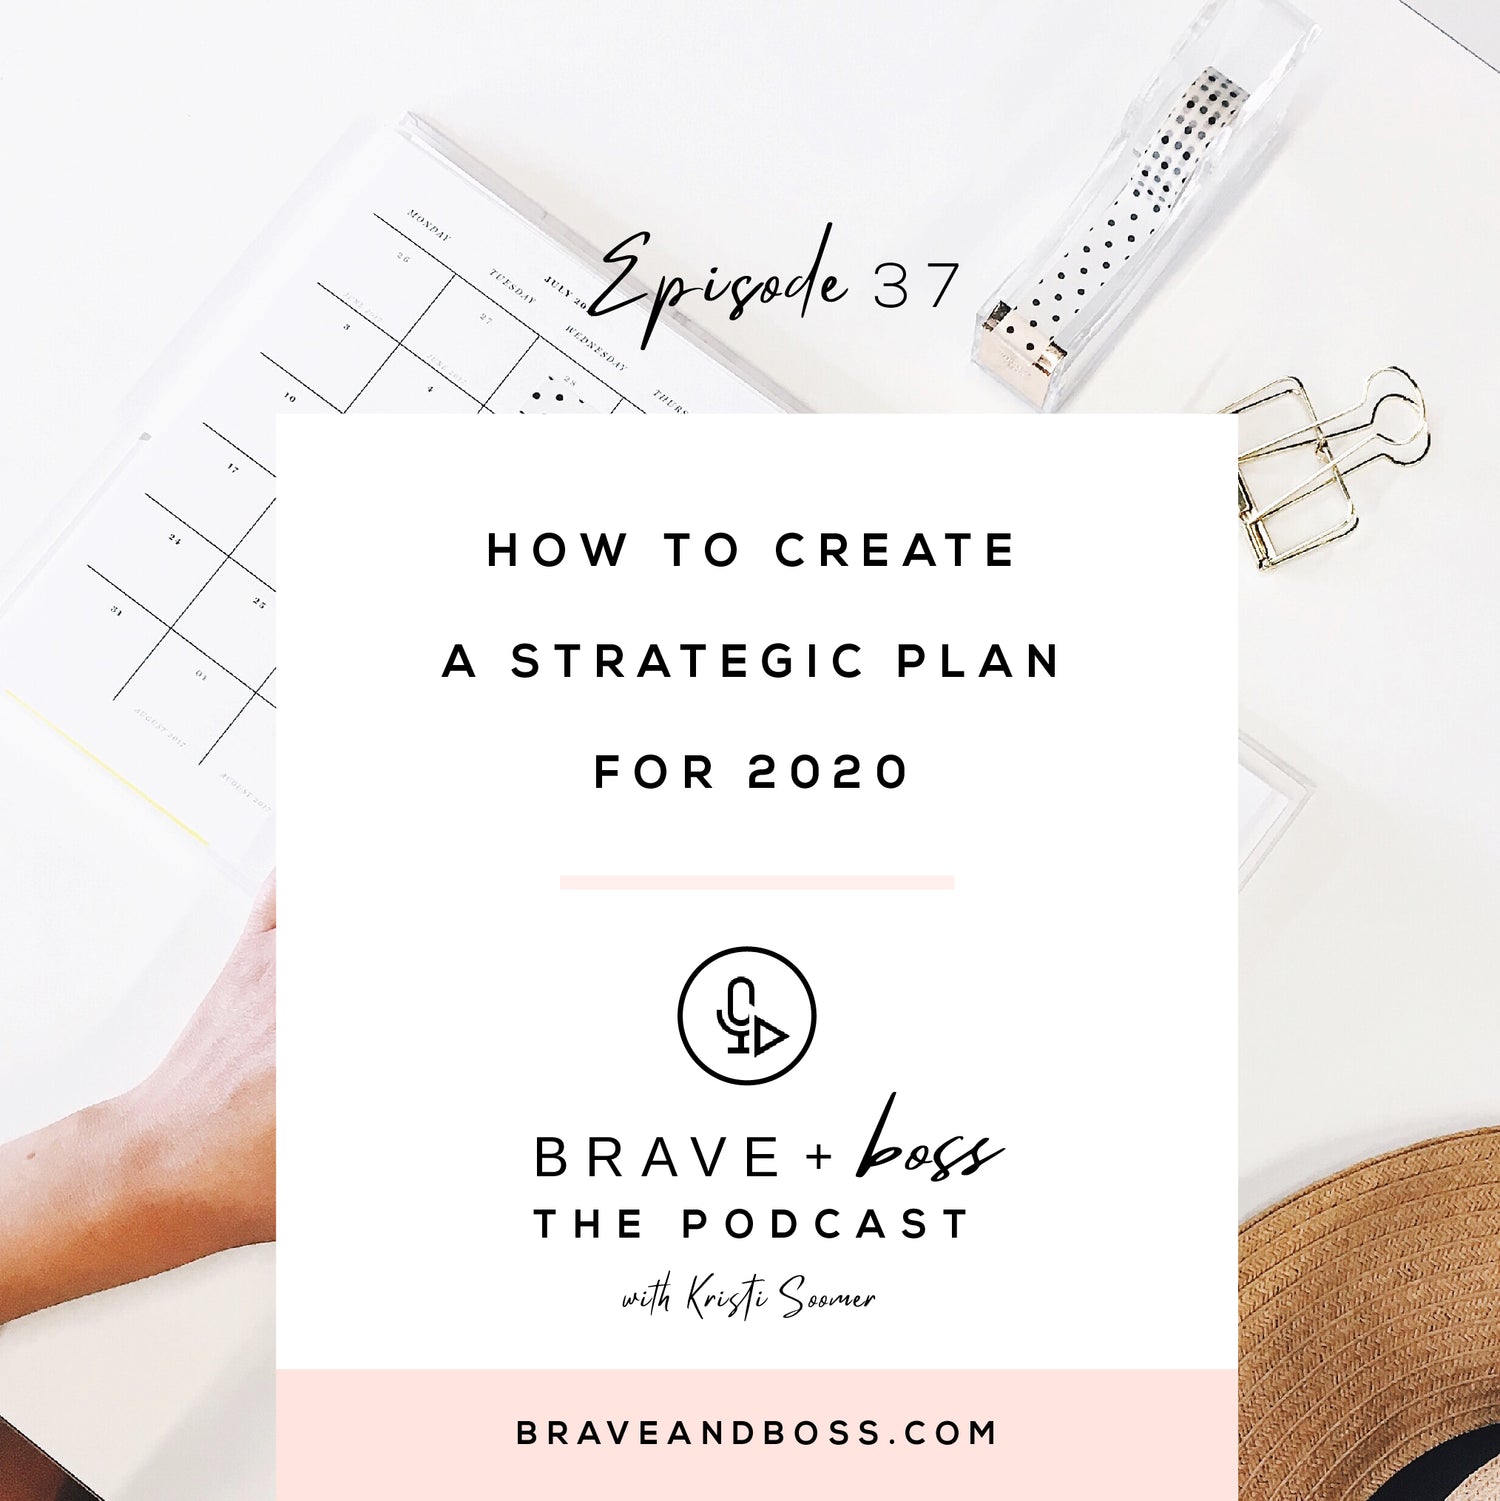 How to Create a Strategic Plan for 2020